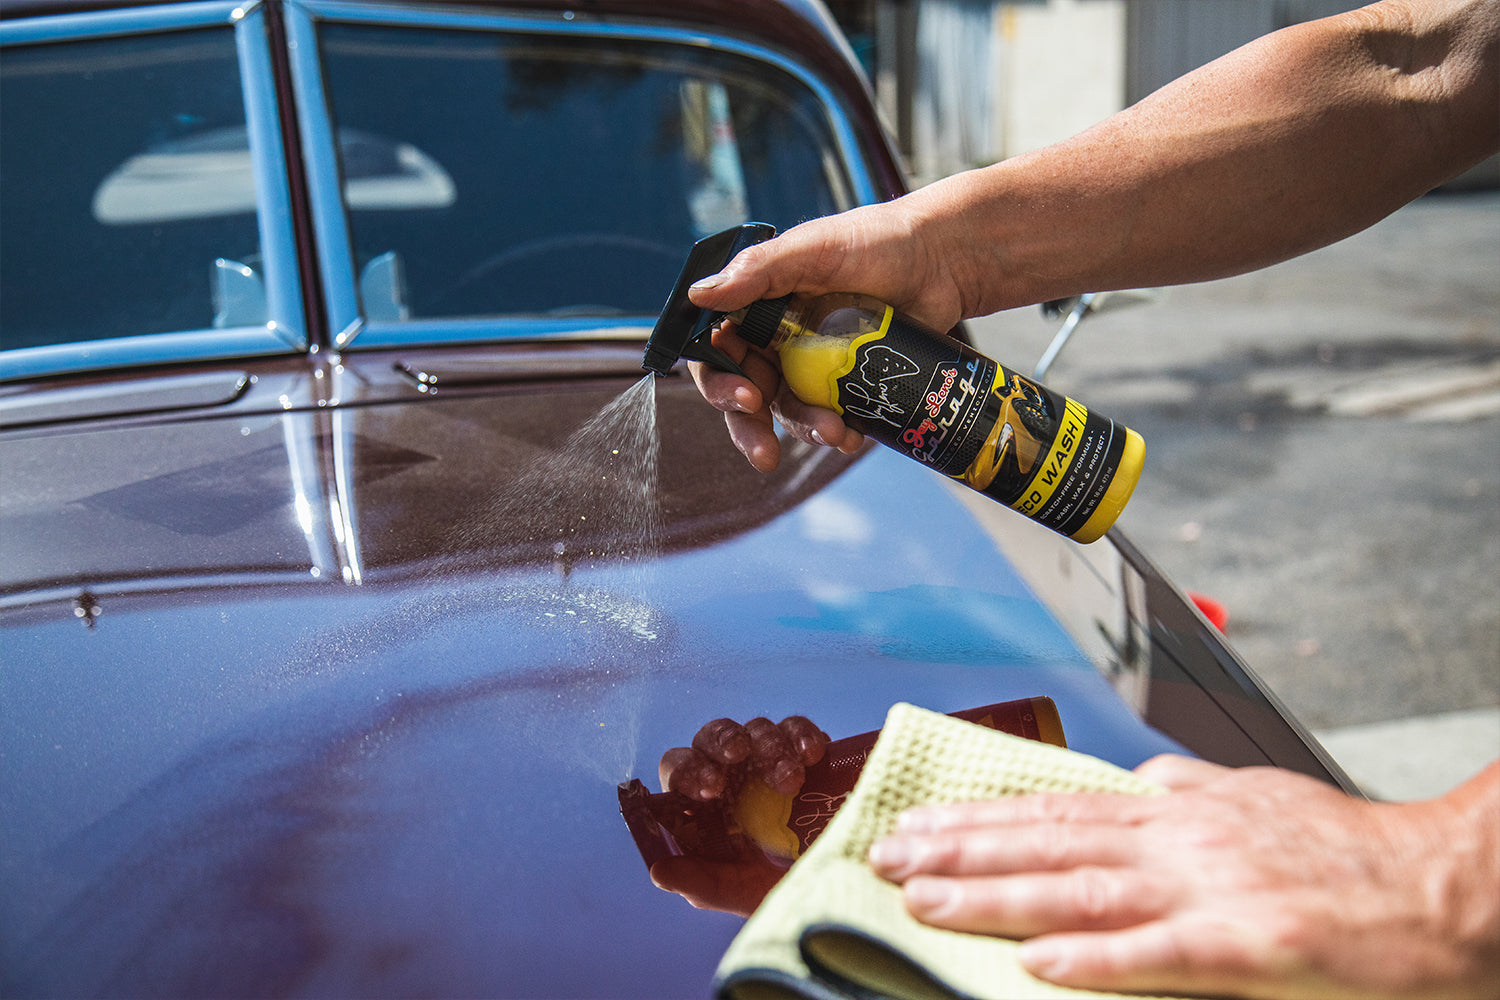 Rev Auto Waterless Car Wash Spray - Cleans Any Vehicle Without A Water Source/No Rinse Car Wash/Waterless Car Cleaner That Cleans Car Exterior